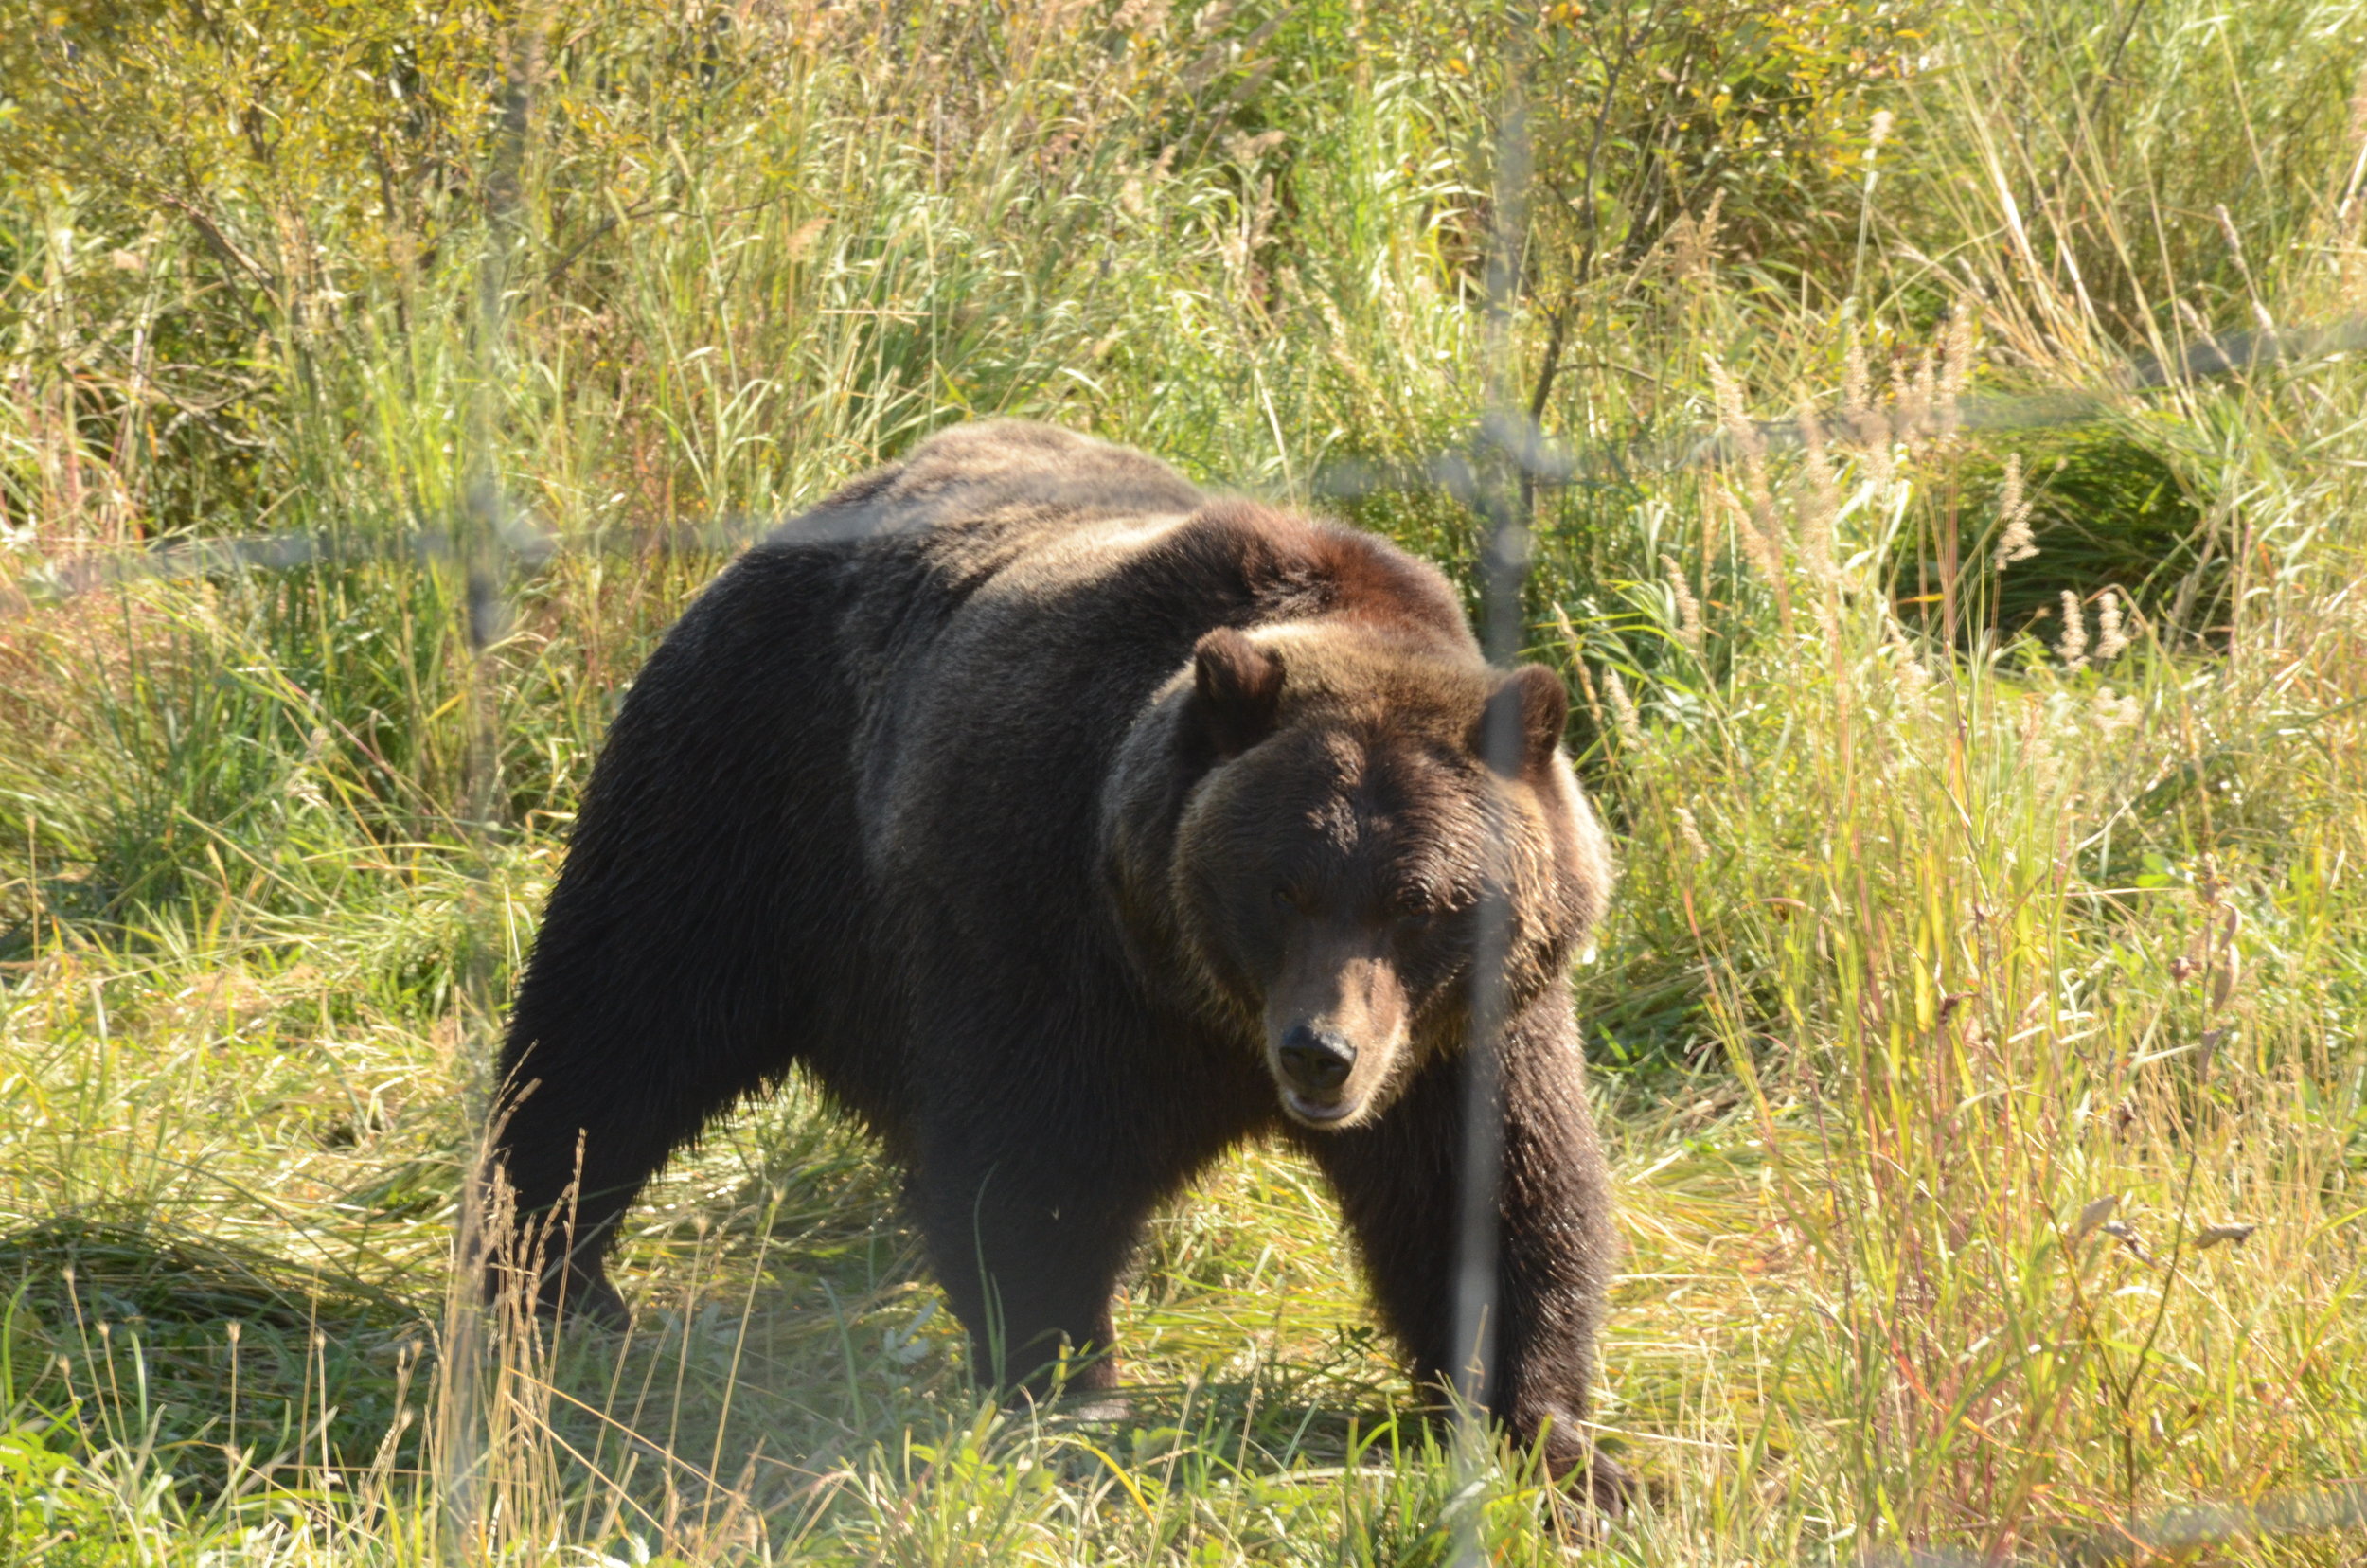  I didn’t find this grizzly in the wild, but in a wildlife sanctuary. 